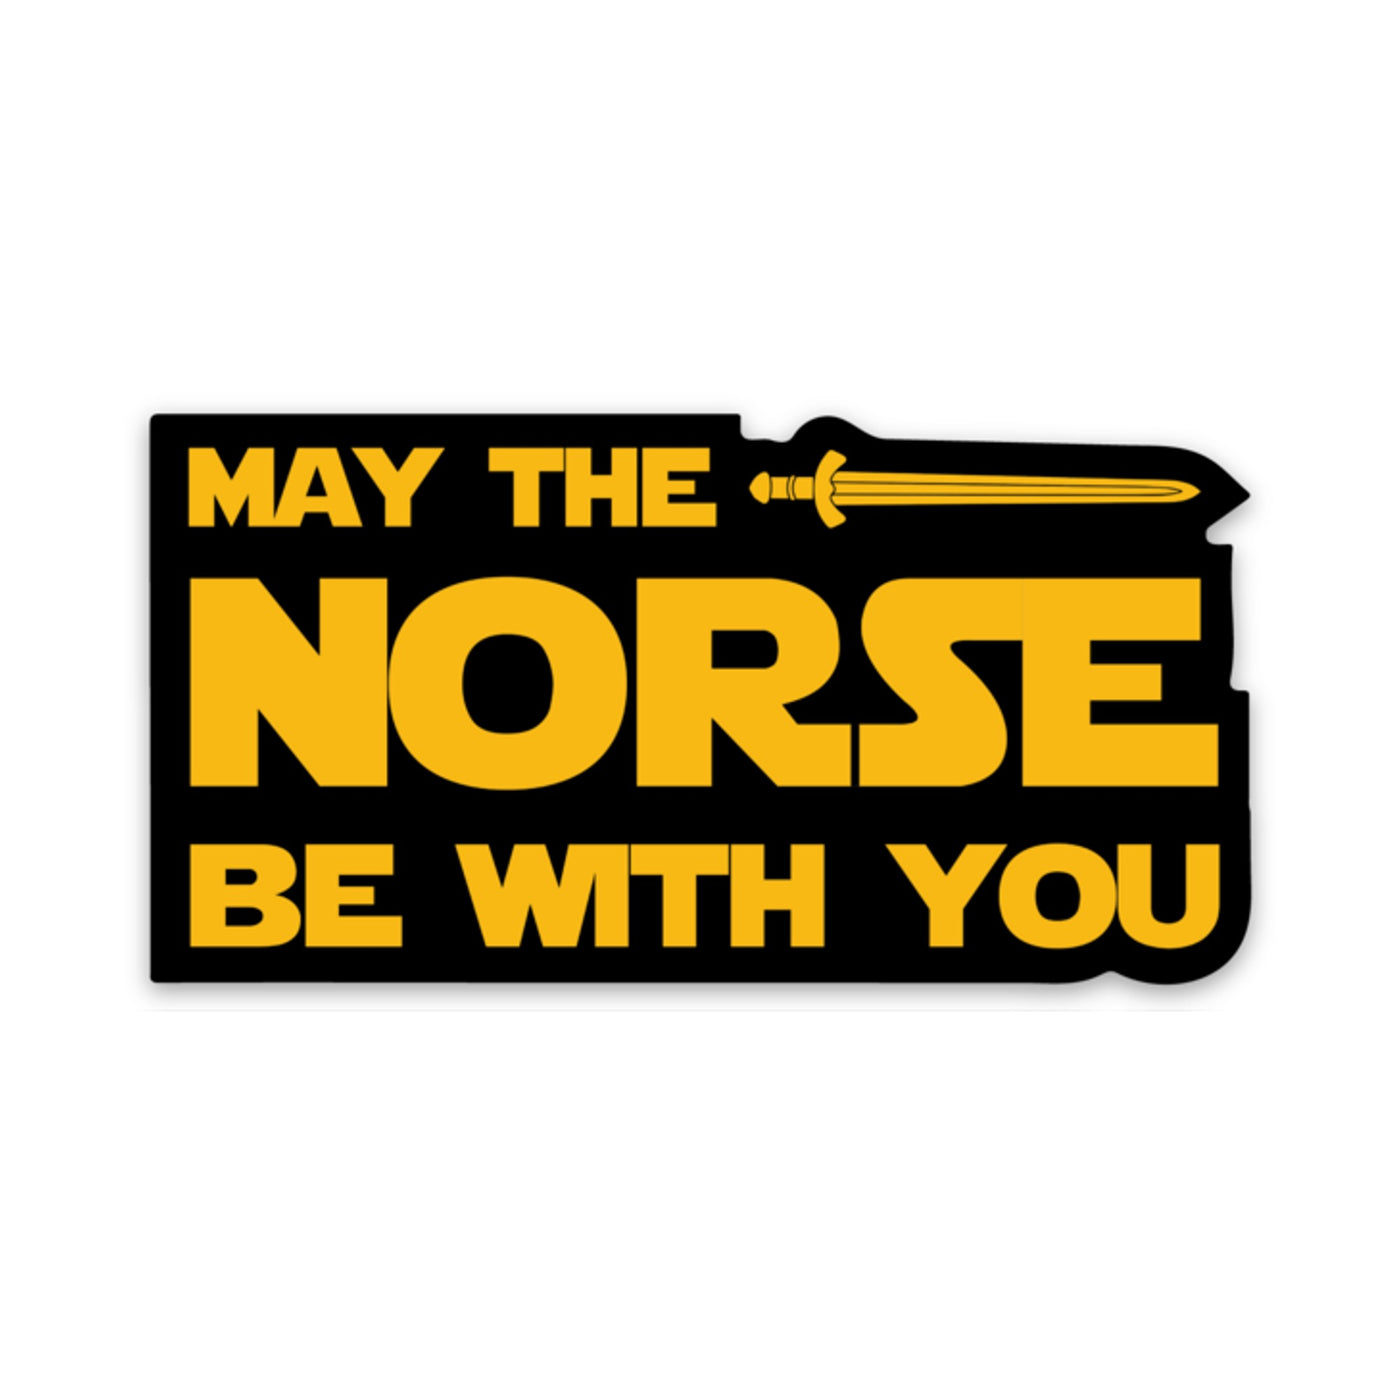 May The Norse Be With You Sticker Scandinavian Design Studio